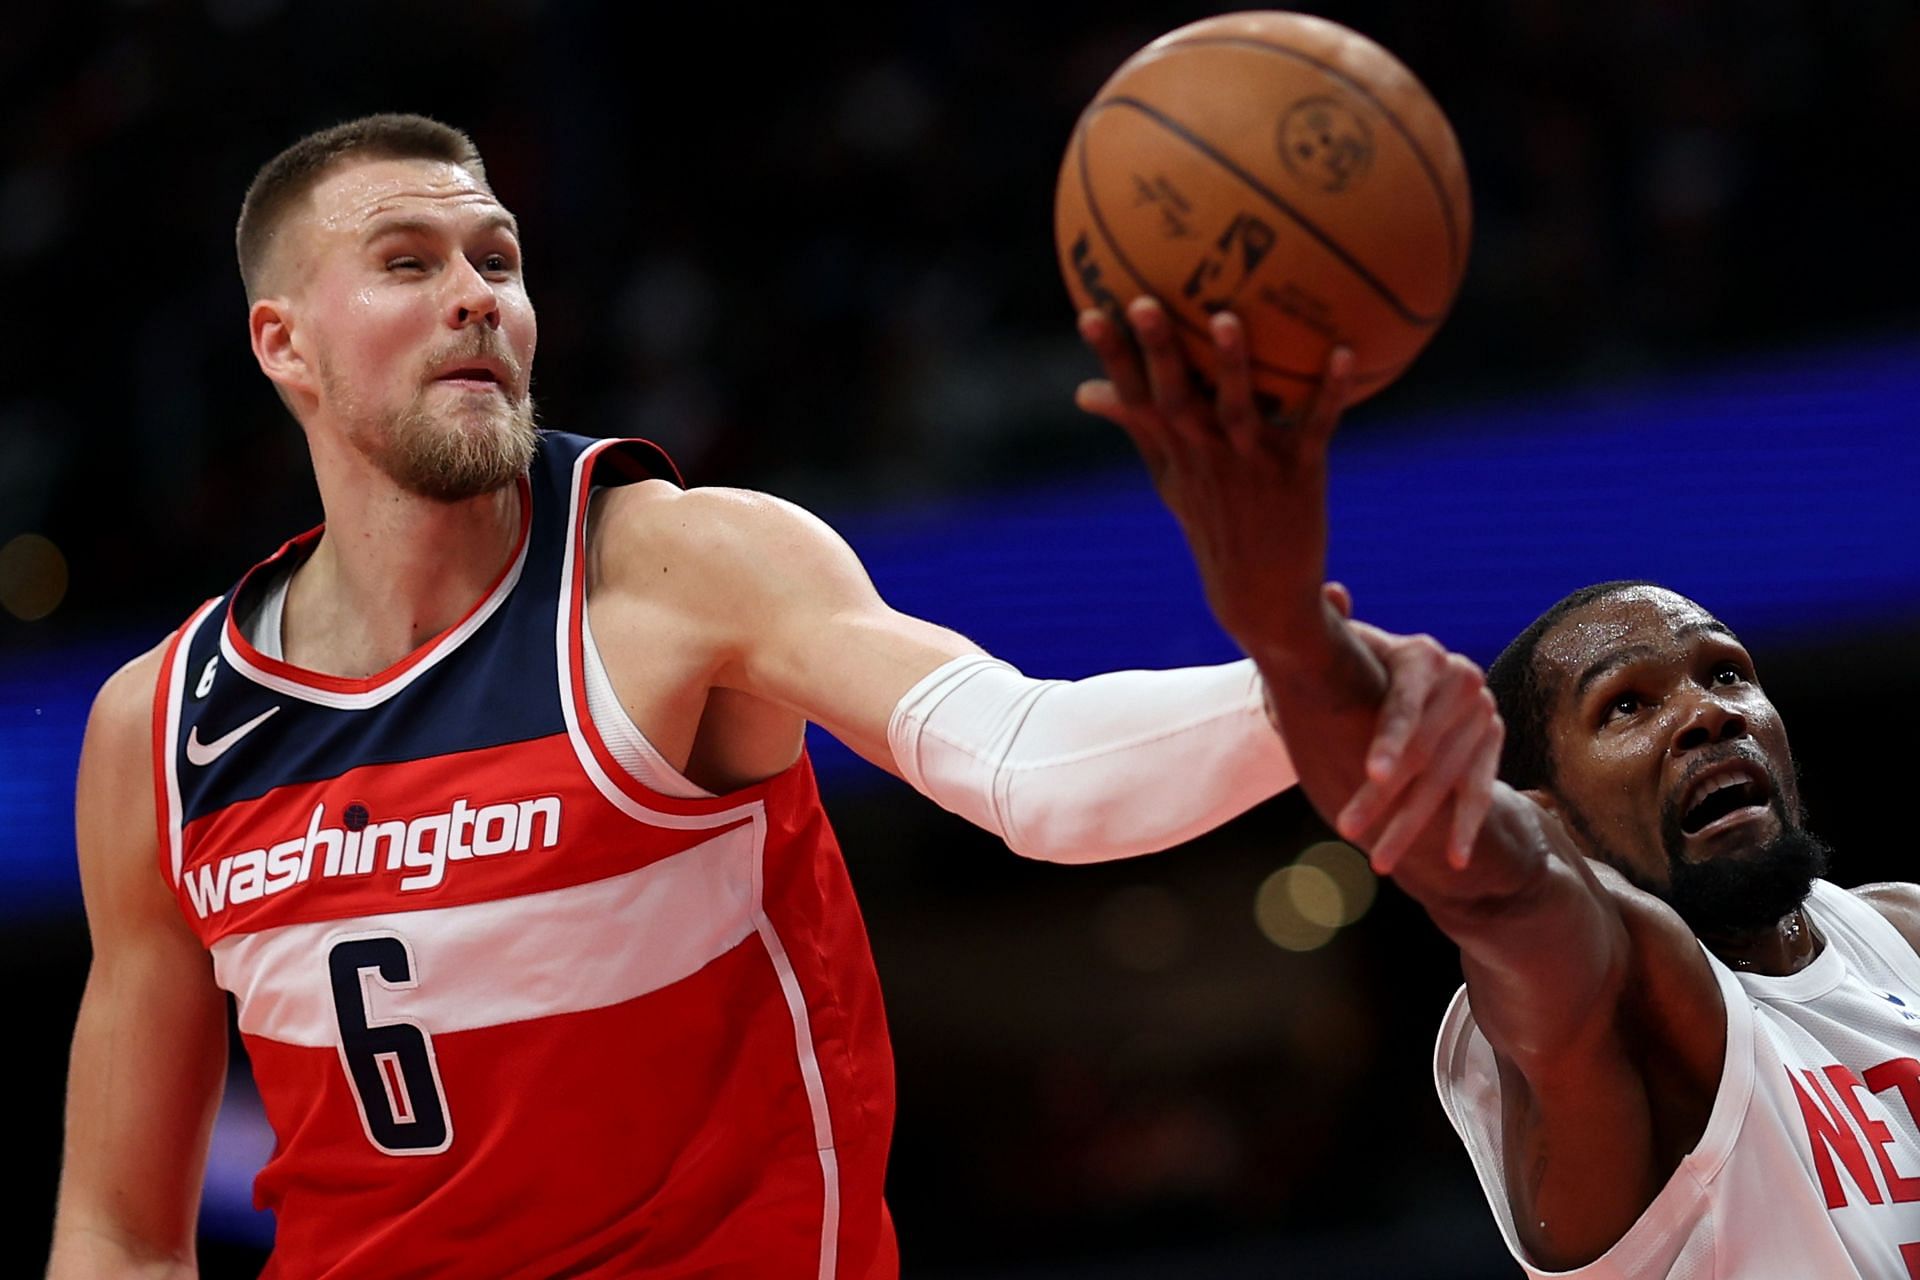 Grizzlies vs Wizards Who Will Win? Betting Prediction, Odds, Line